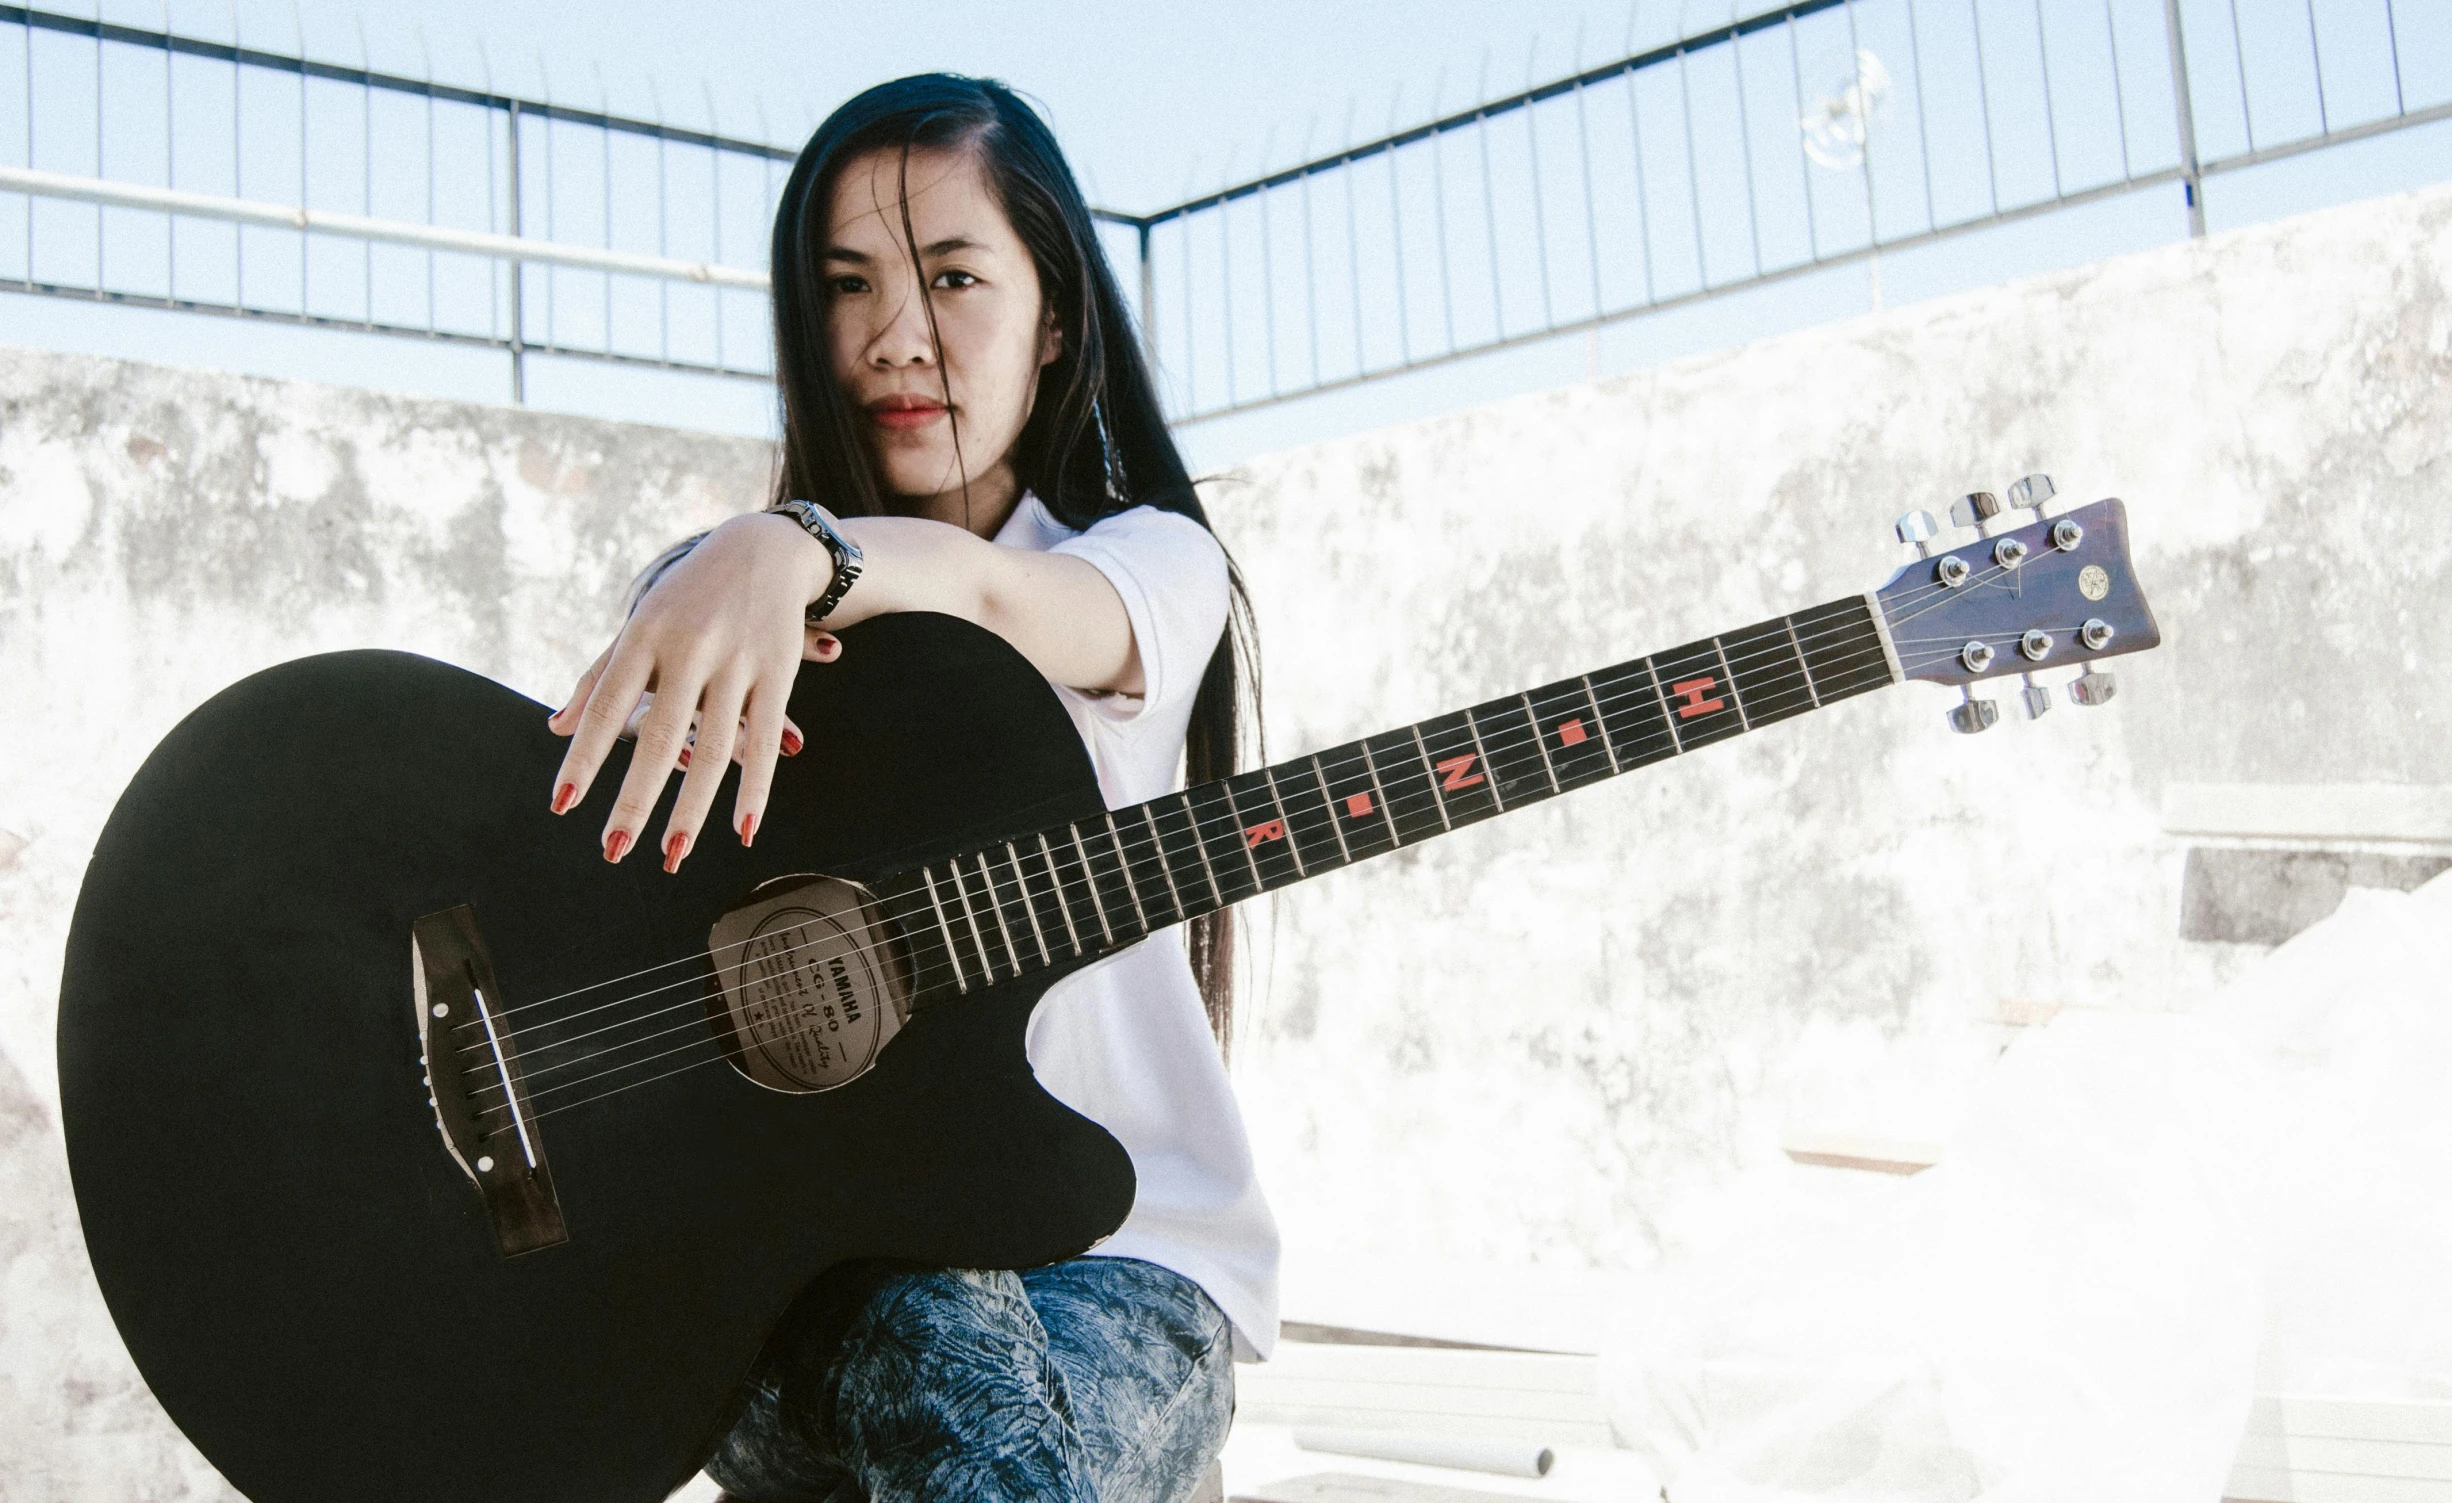 a girl poses with her acoustic guitar, holding it in her hands